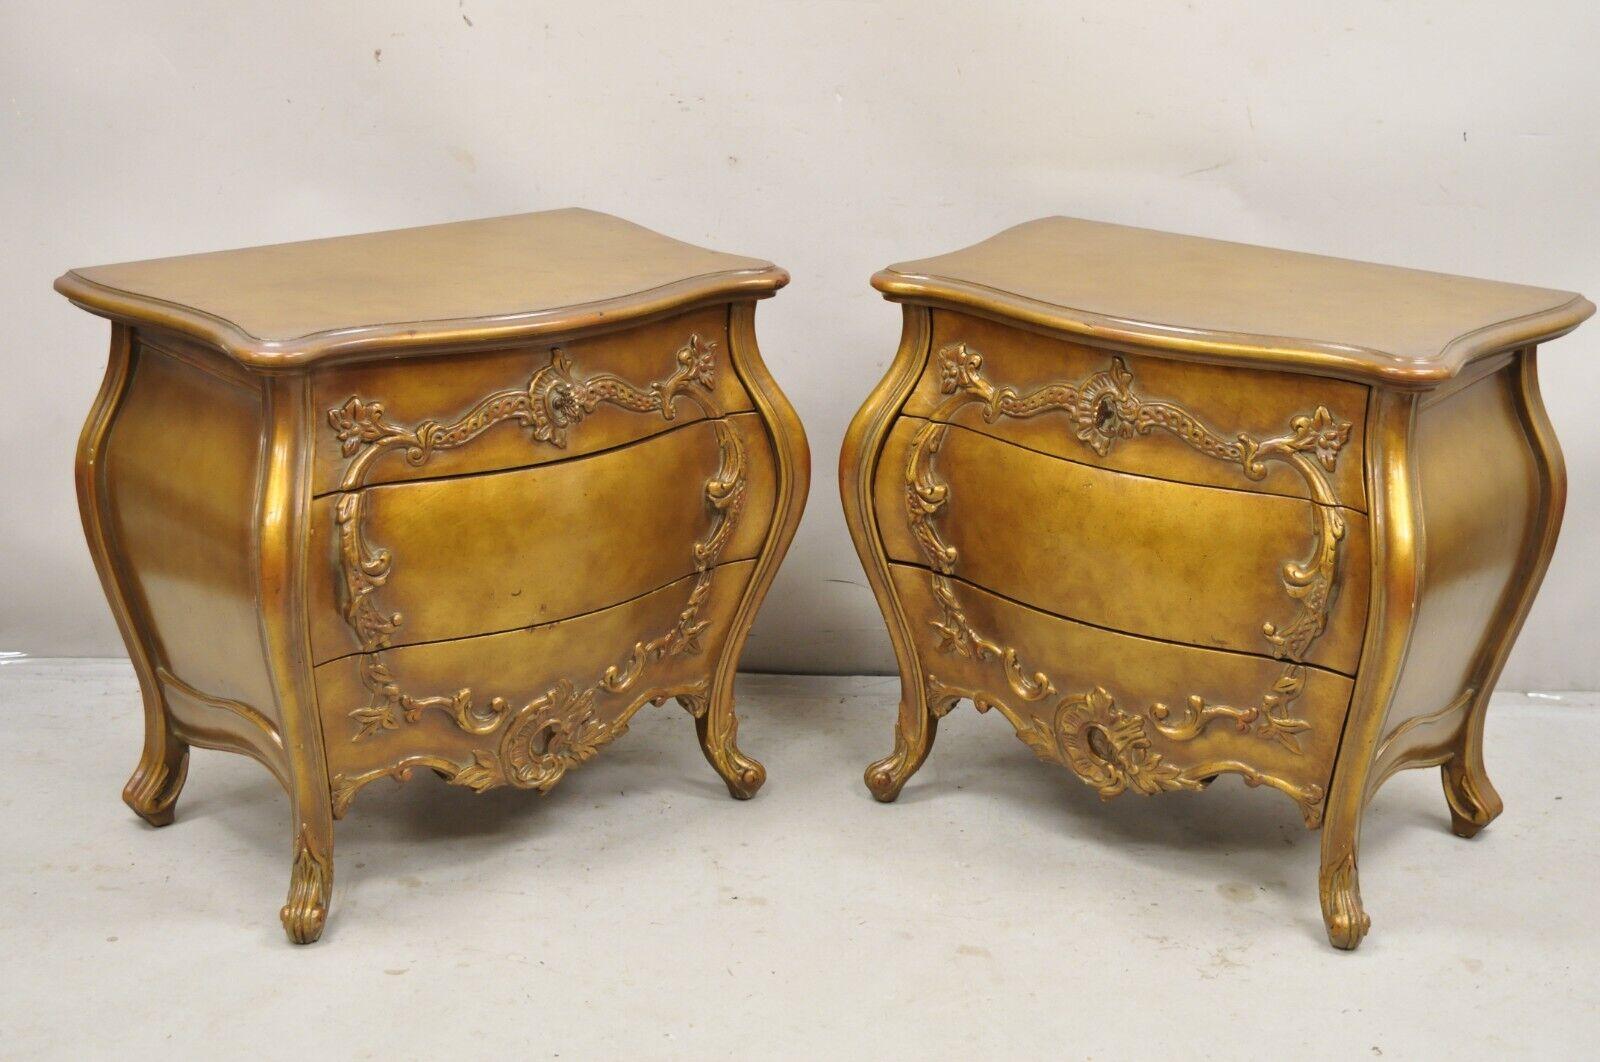 Vintage French Rococo Baroque Style Gold Gilt Bombe Nightstands - a Pair For Sale 7